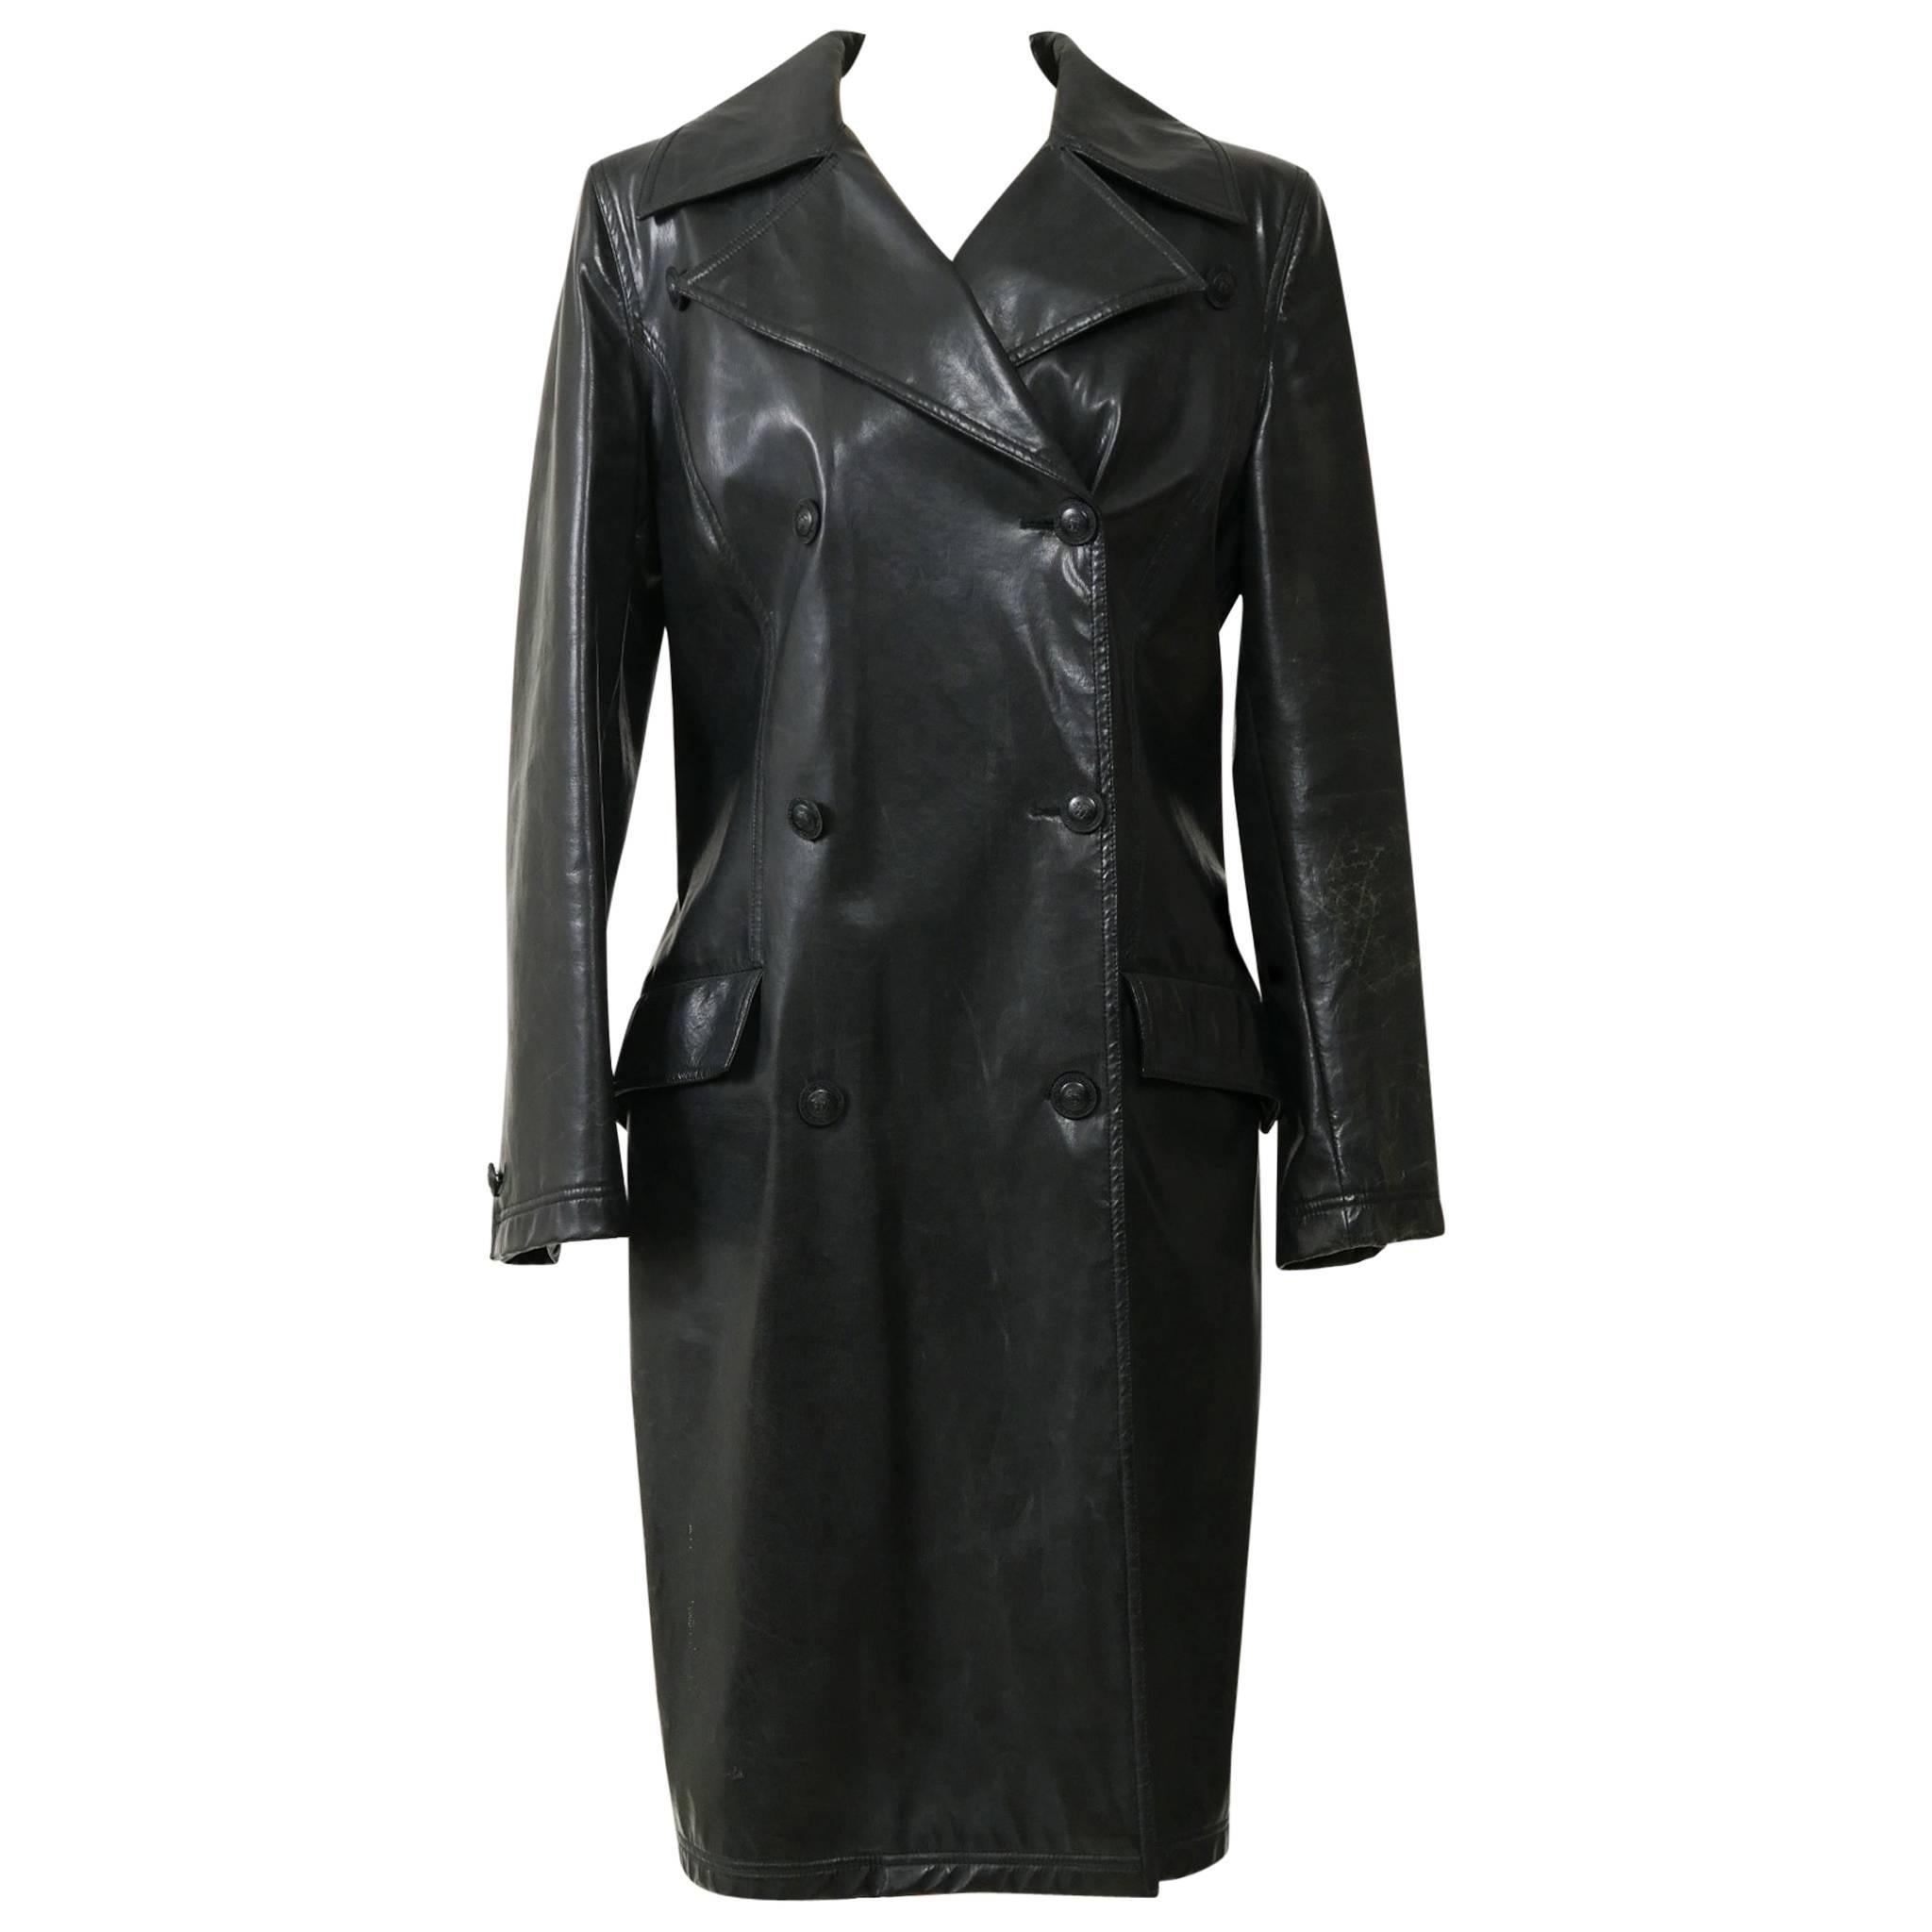 1990s GIANNI VERSACE Black Leather Trench Coat For Sale